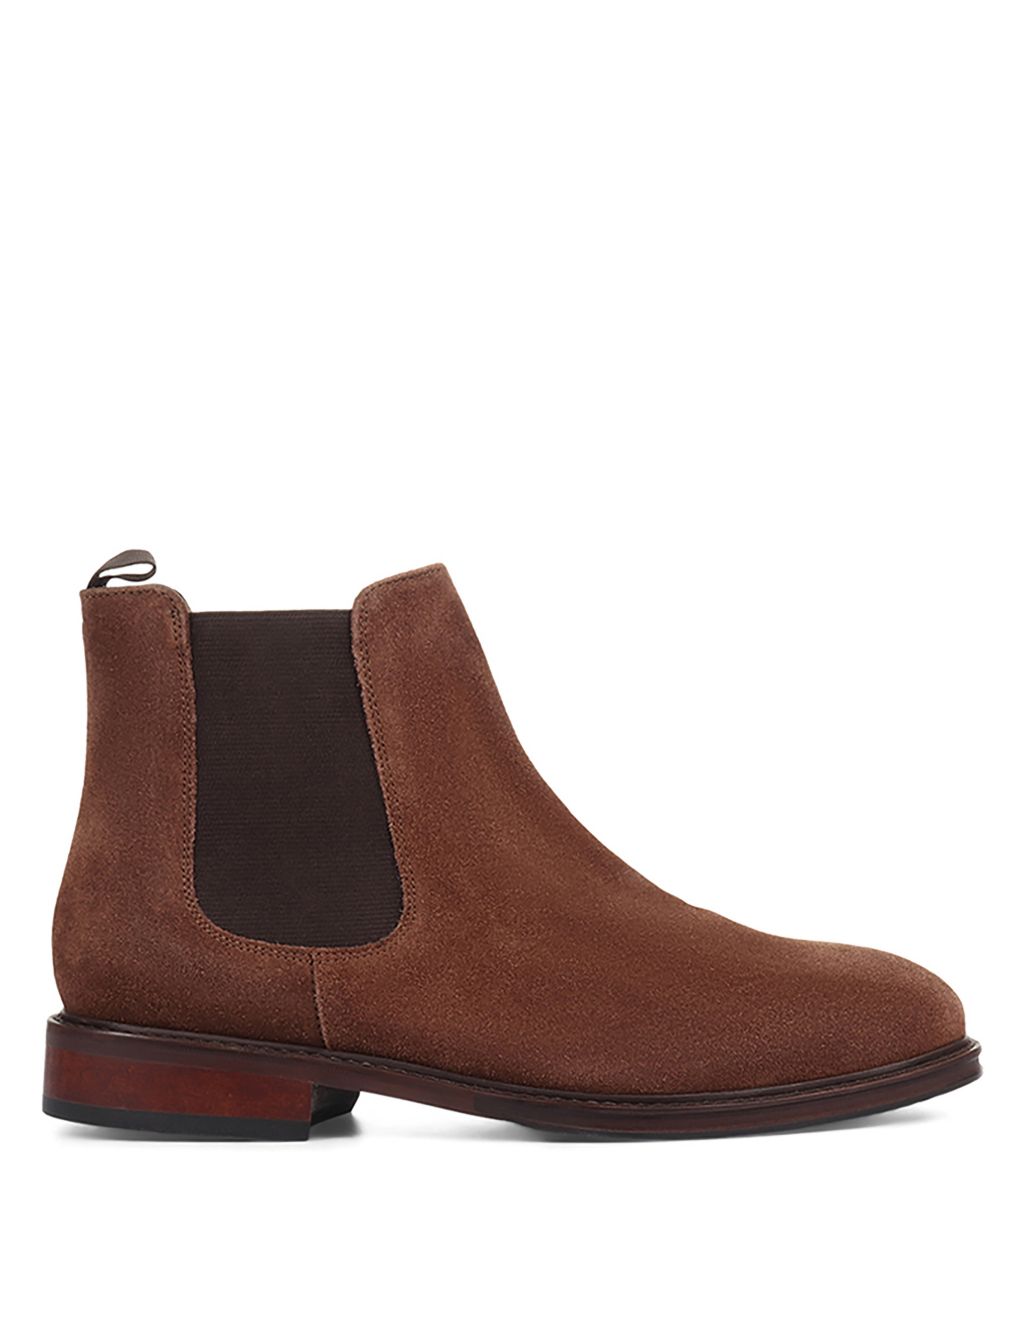 Leather Pull-on Chelsea Boots image 5